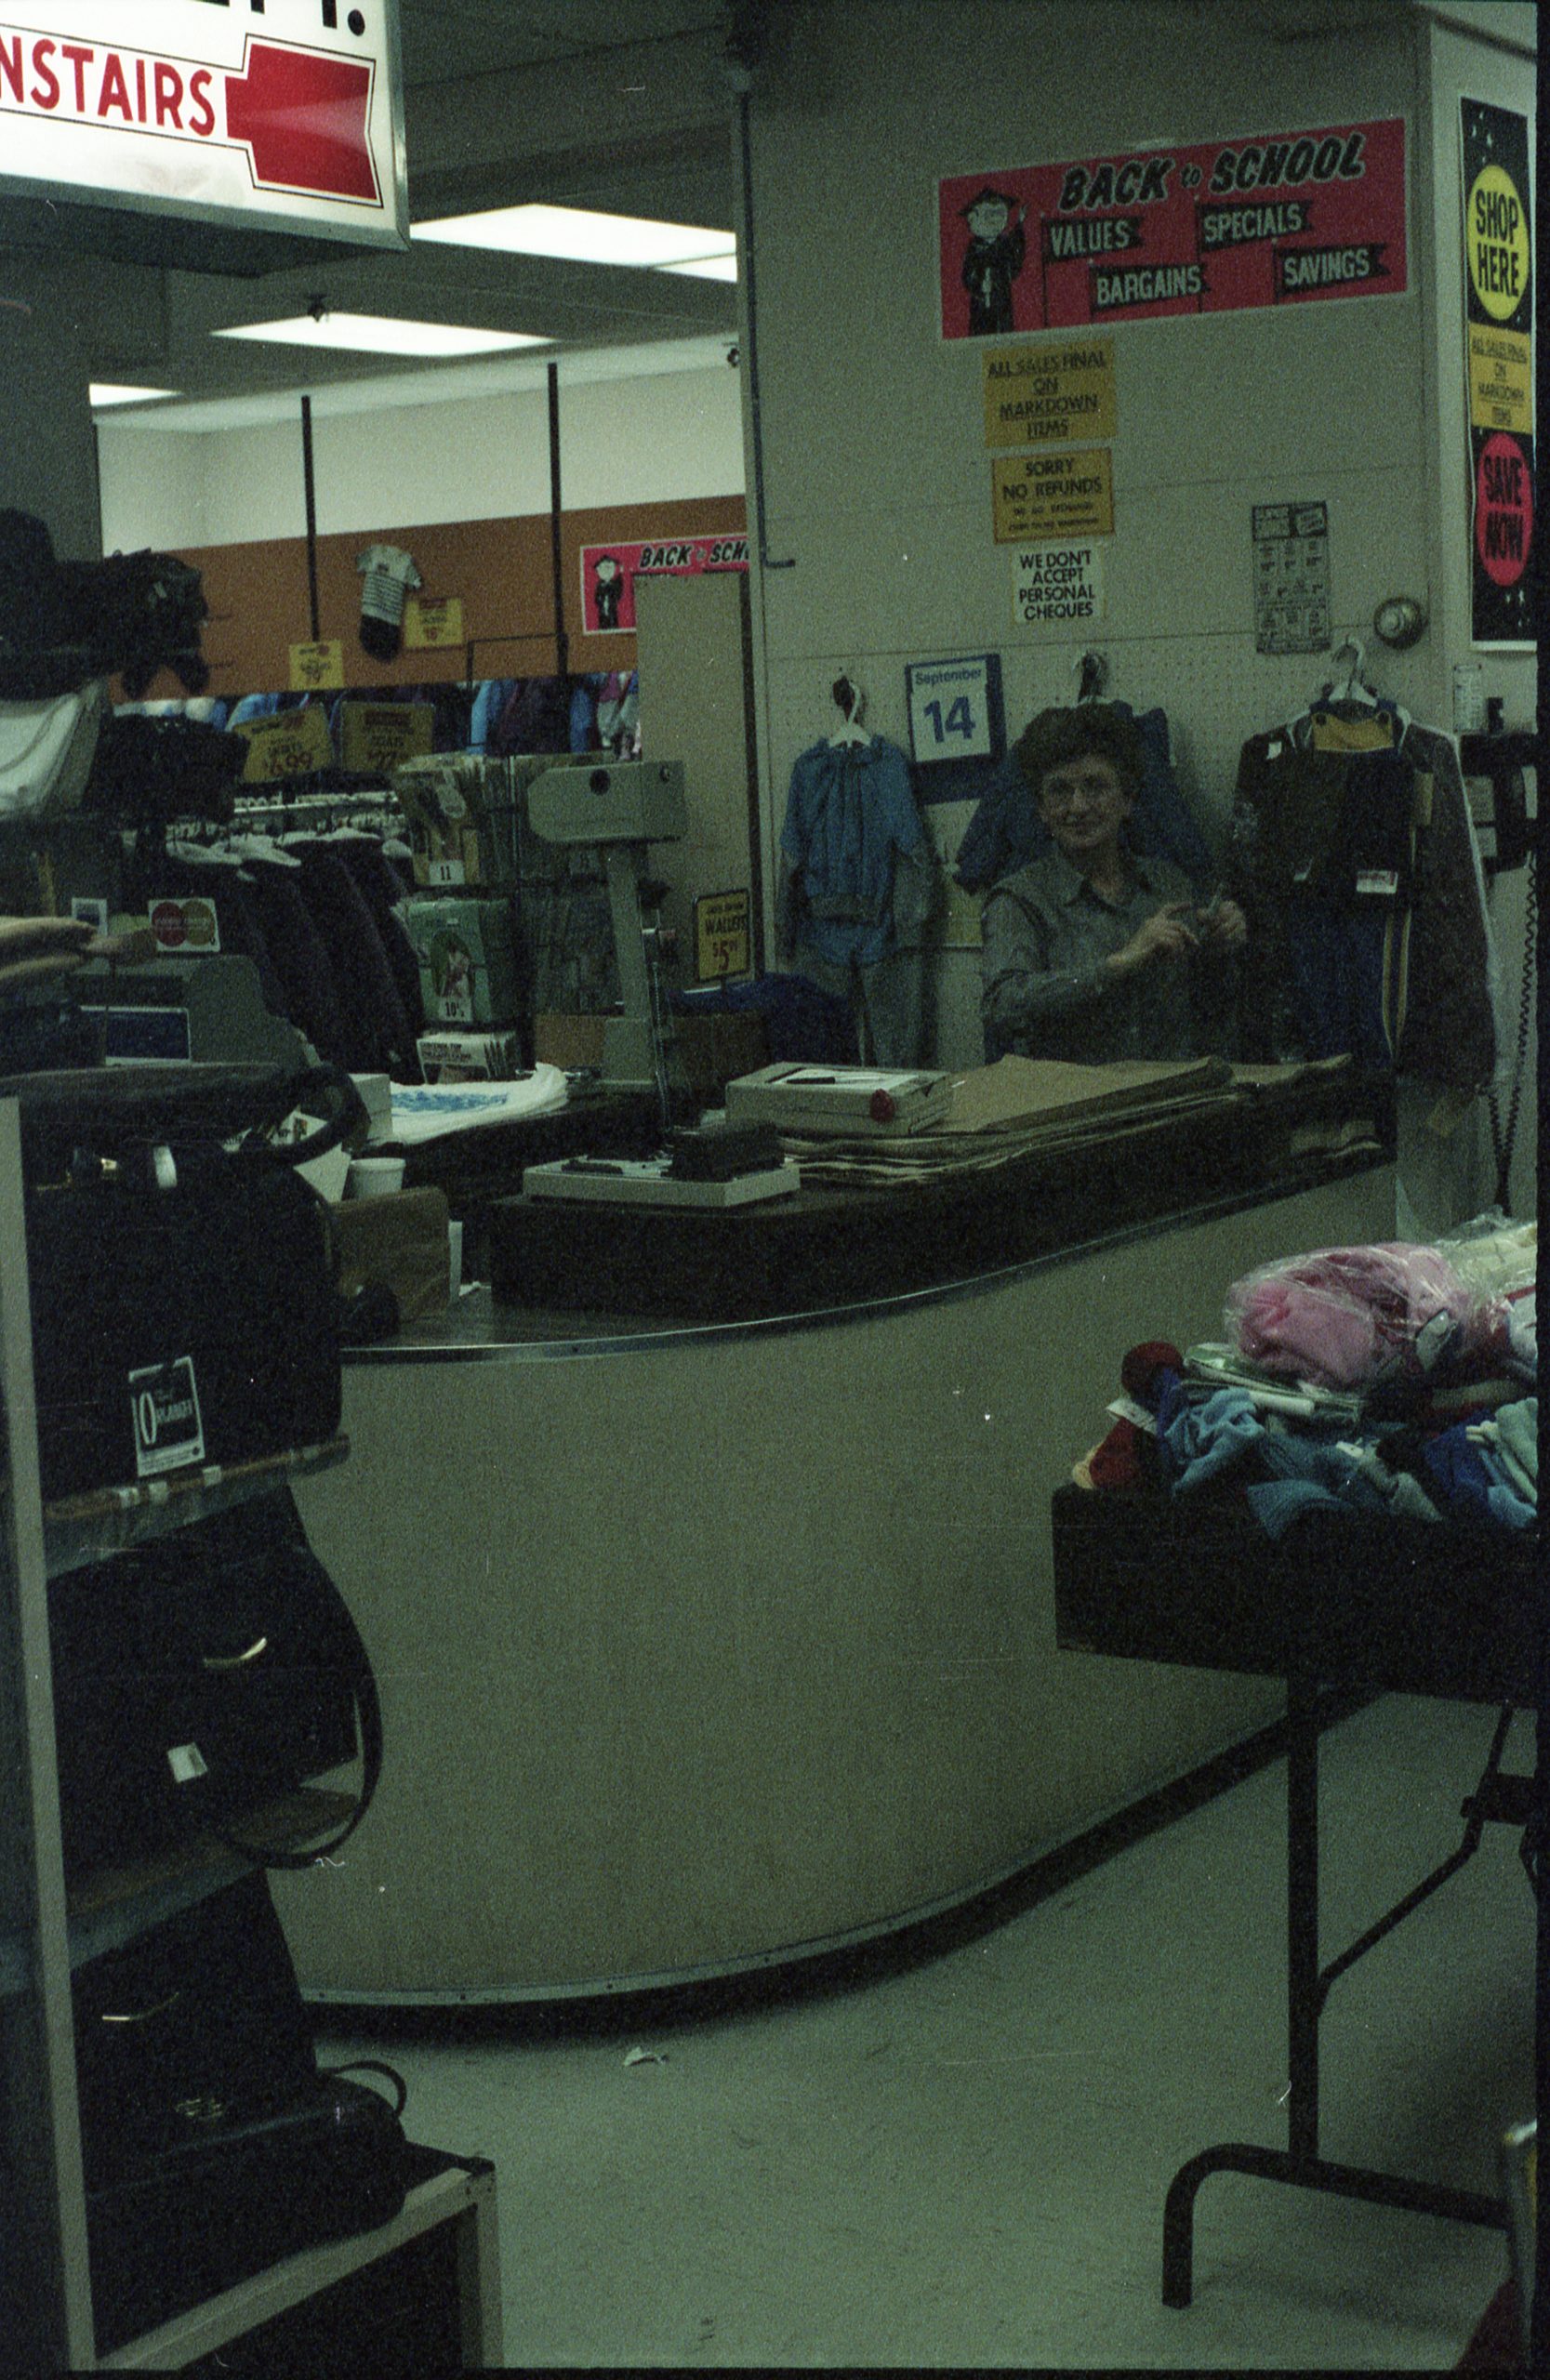 Woman standing behind a curved counter – stands with handbags and clothing in foreground.